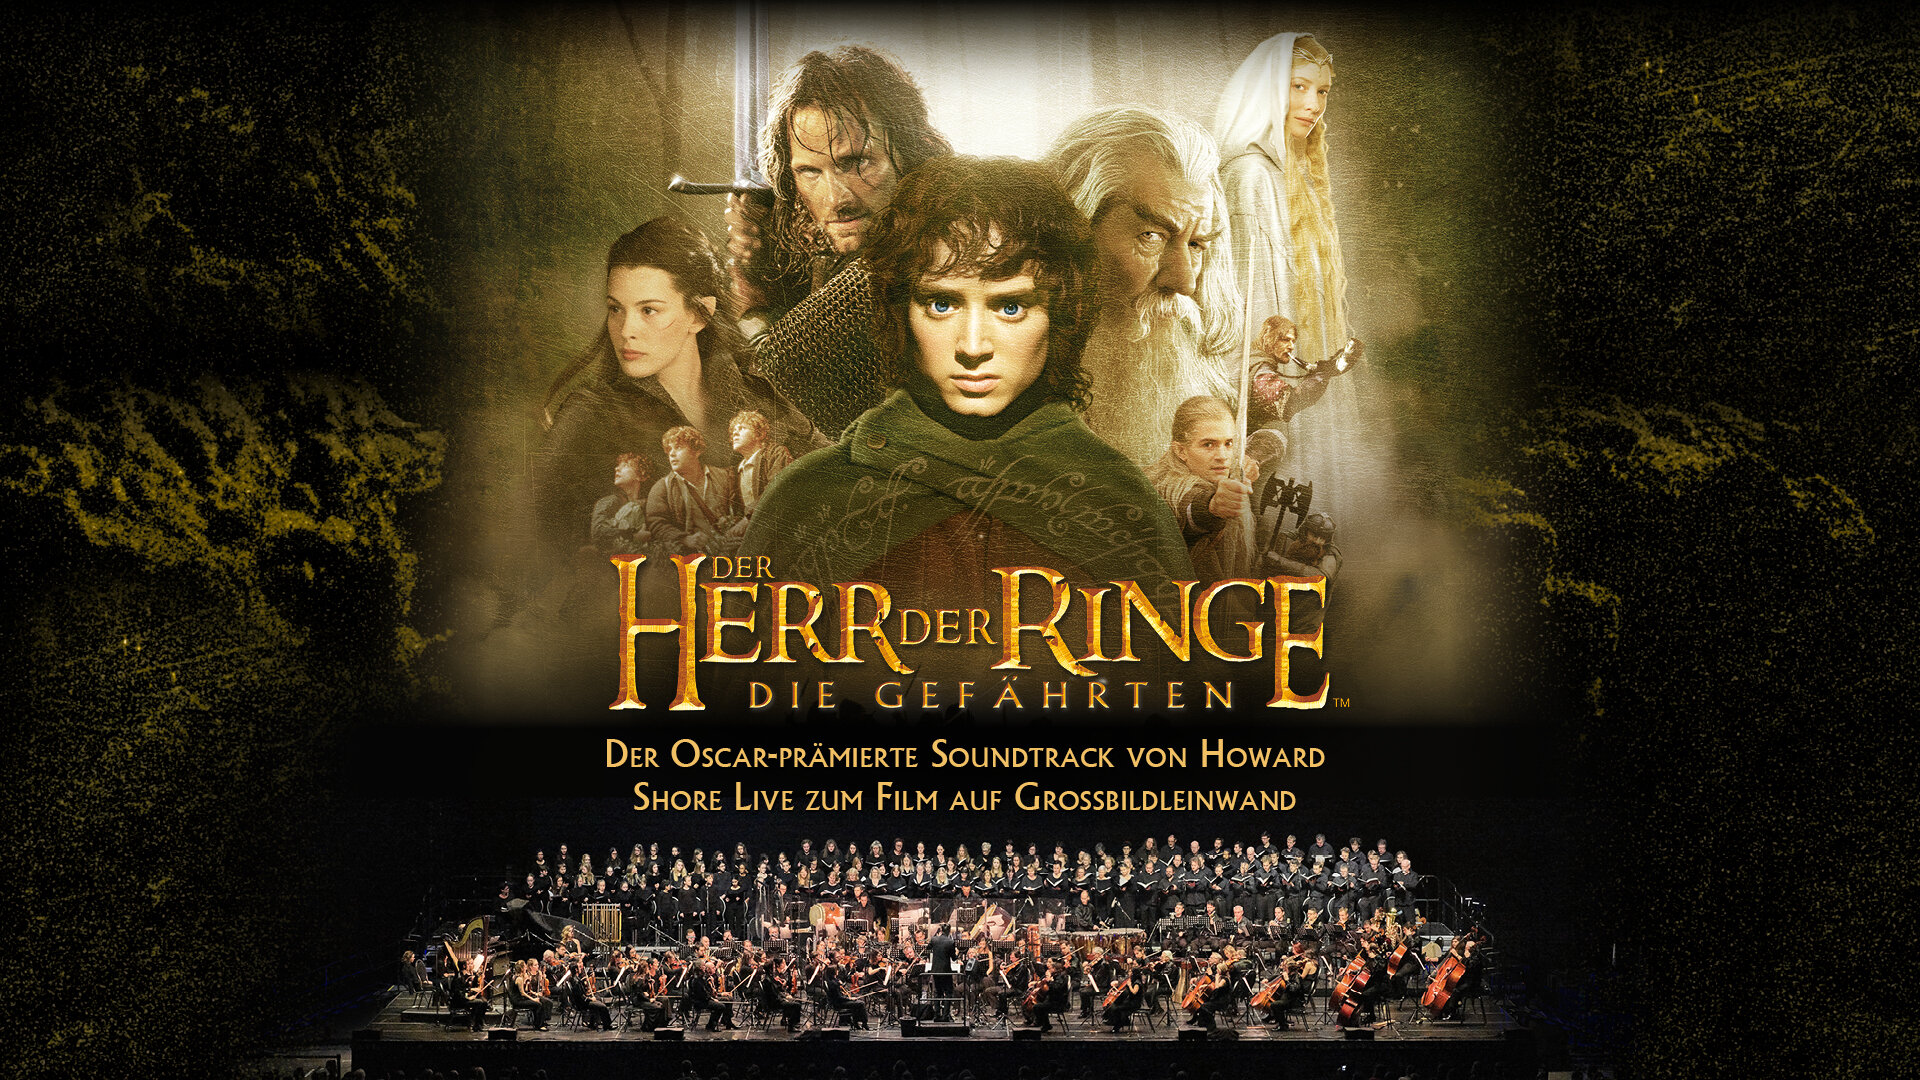 Howard Shore - Lord of the Rings - The Fellowship of the Ring